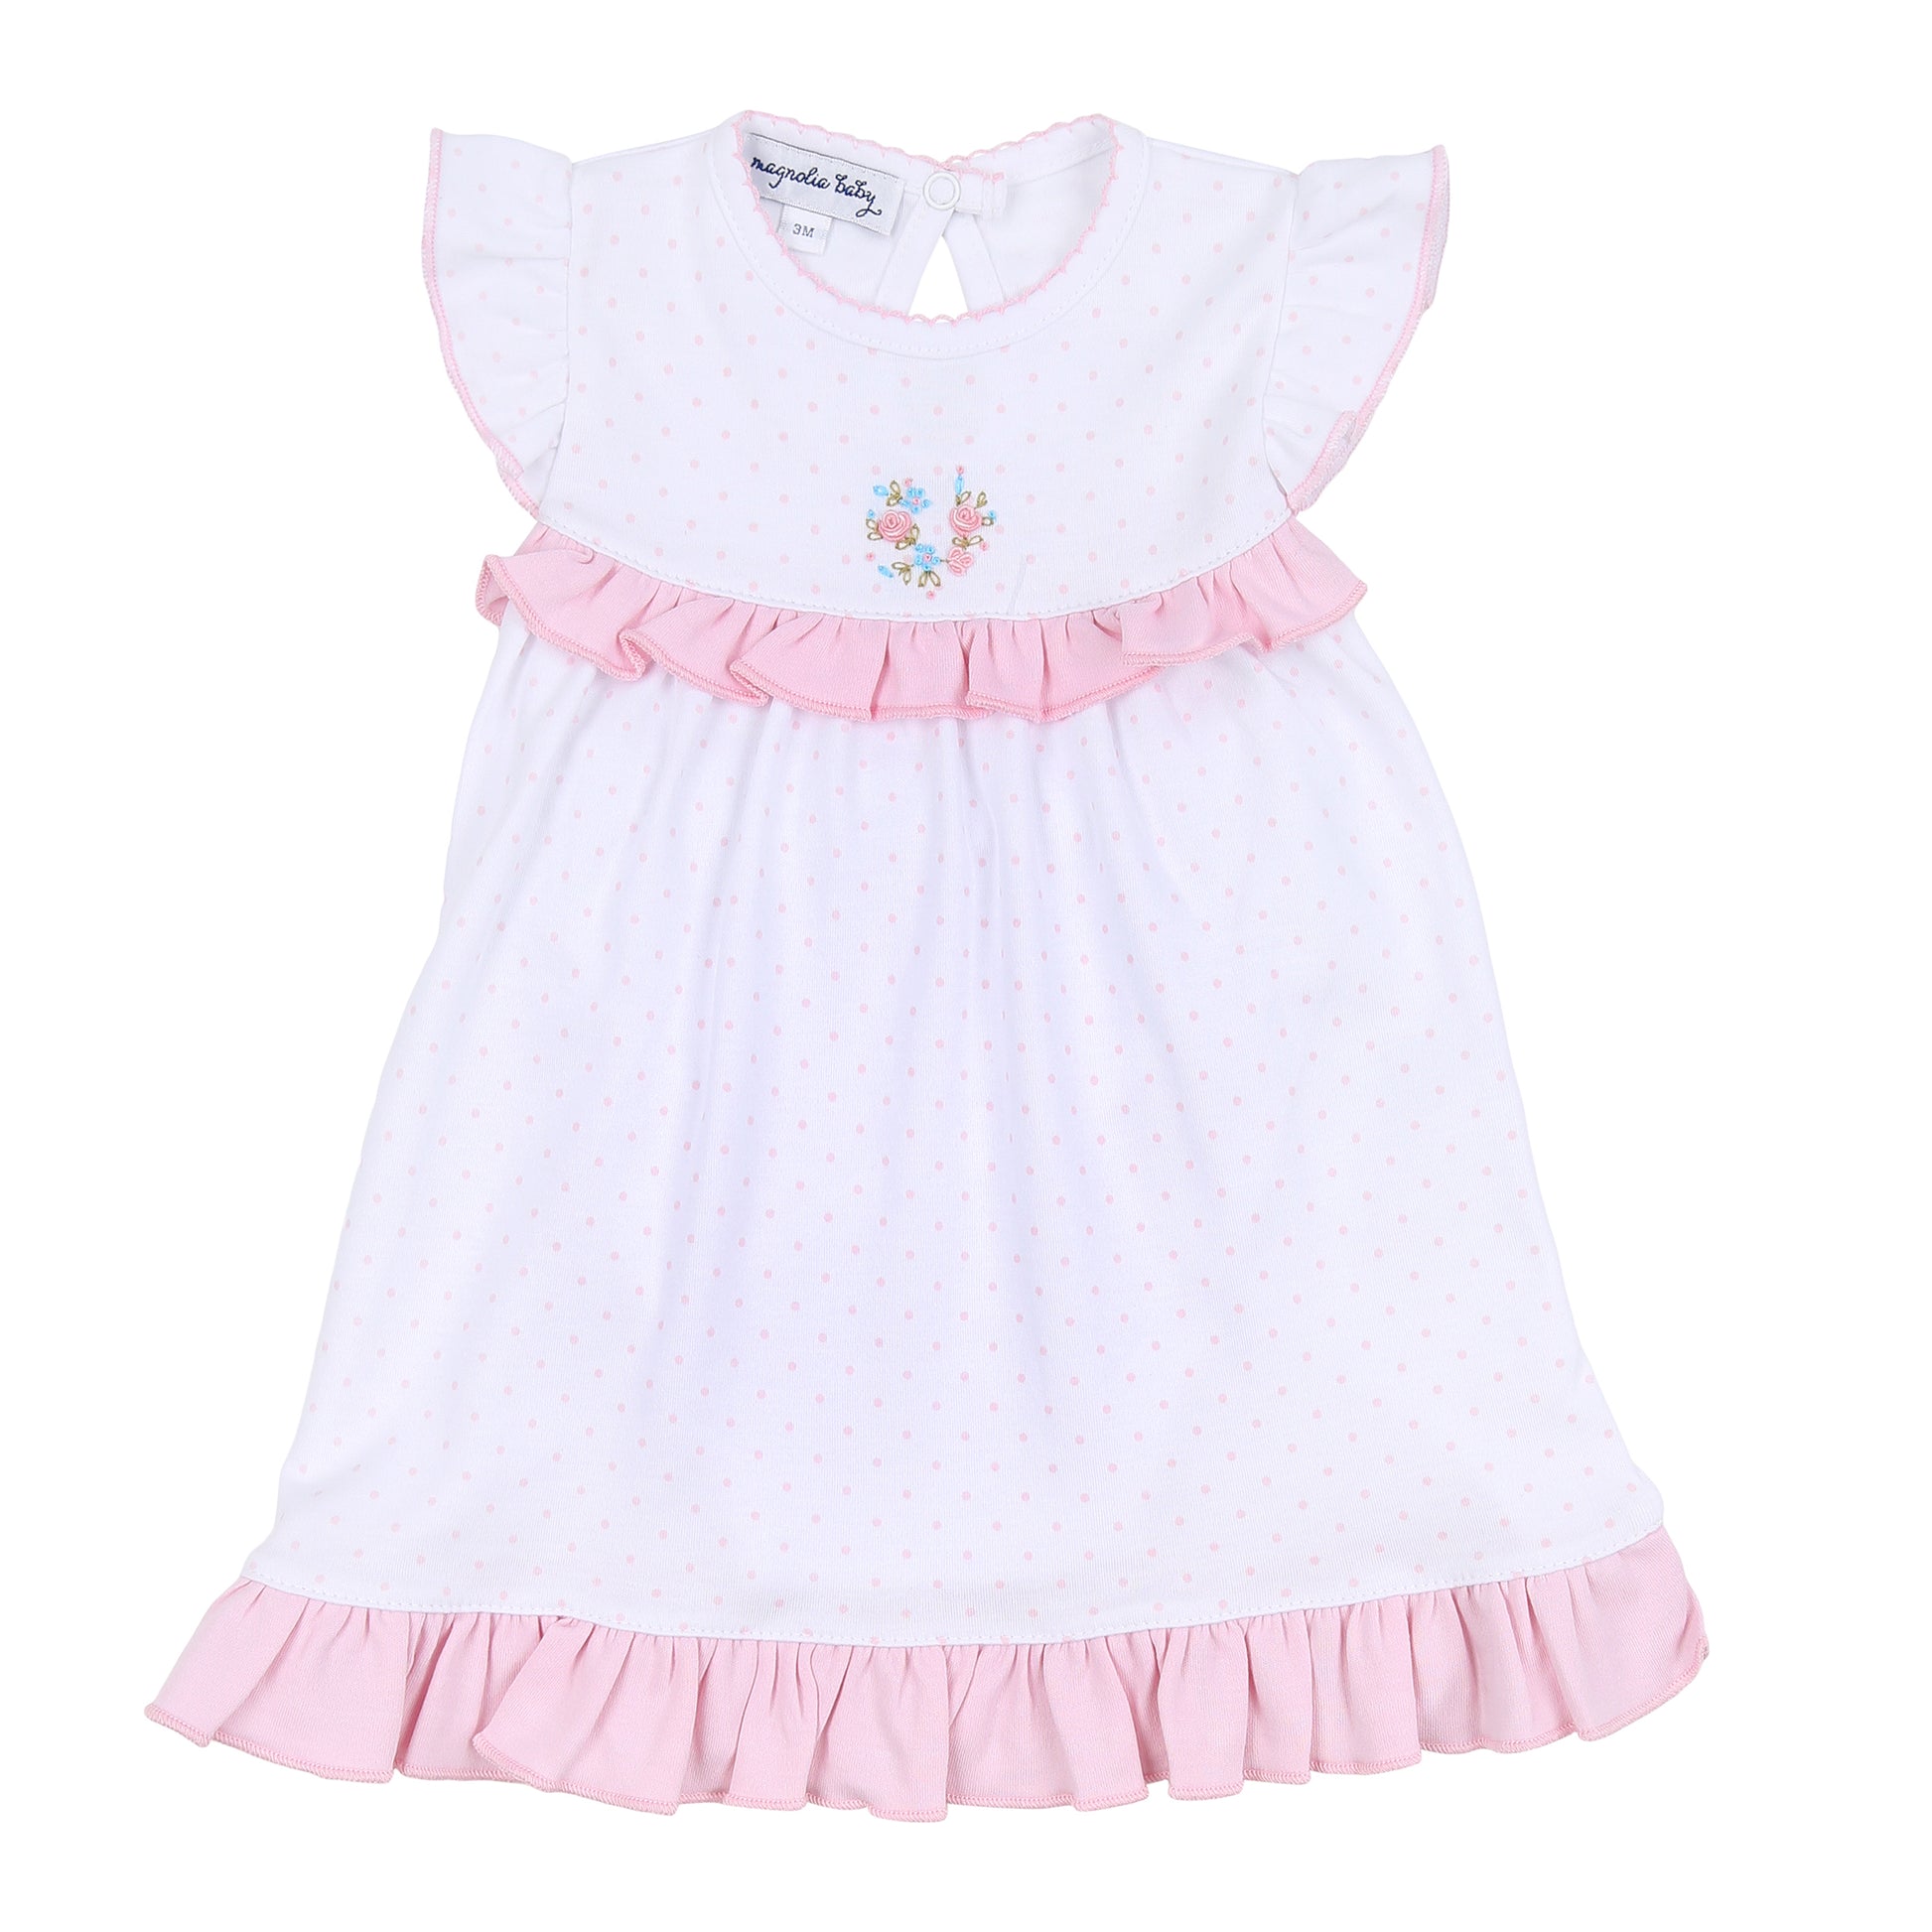 Magnolia Baby Annalise's Classics Embroidered Ruffle Flutters Toddler Dress